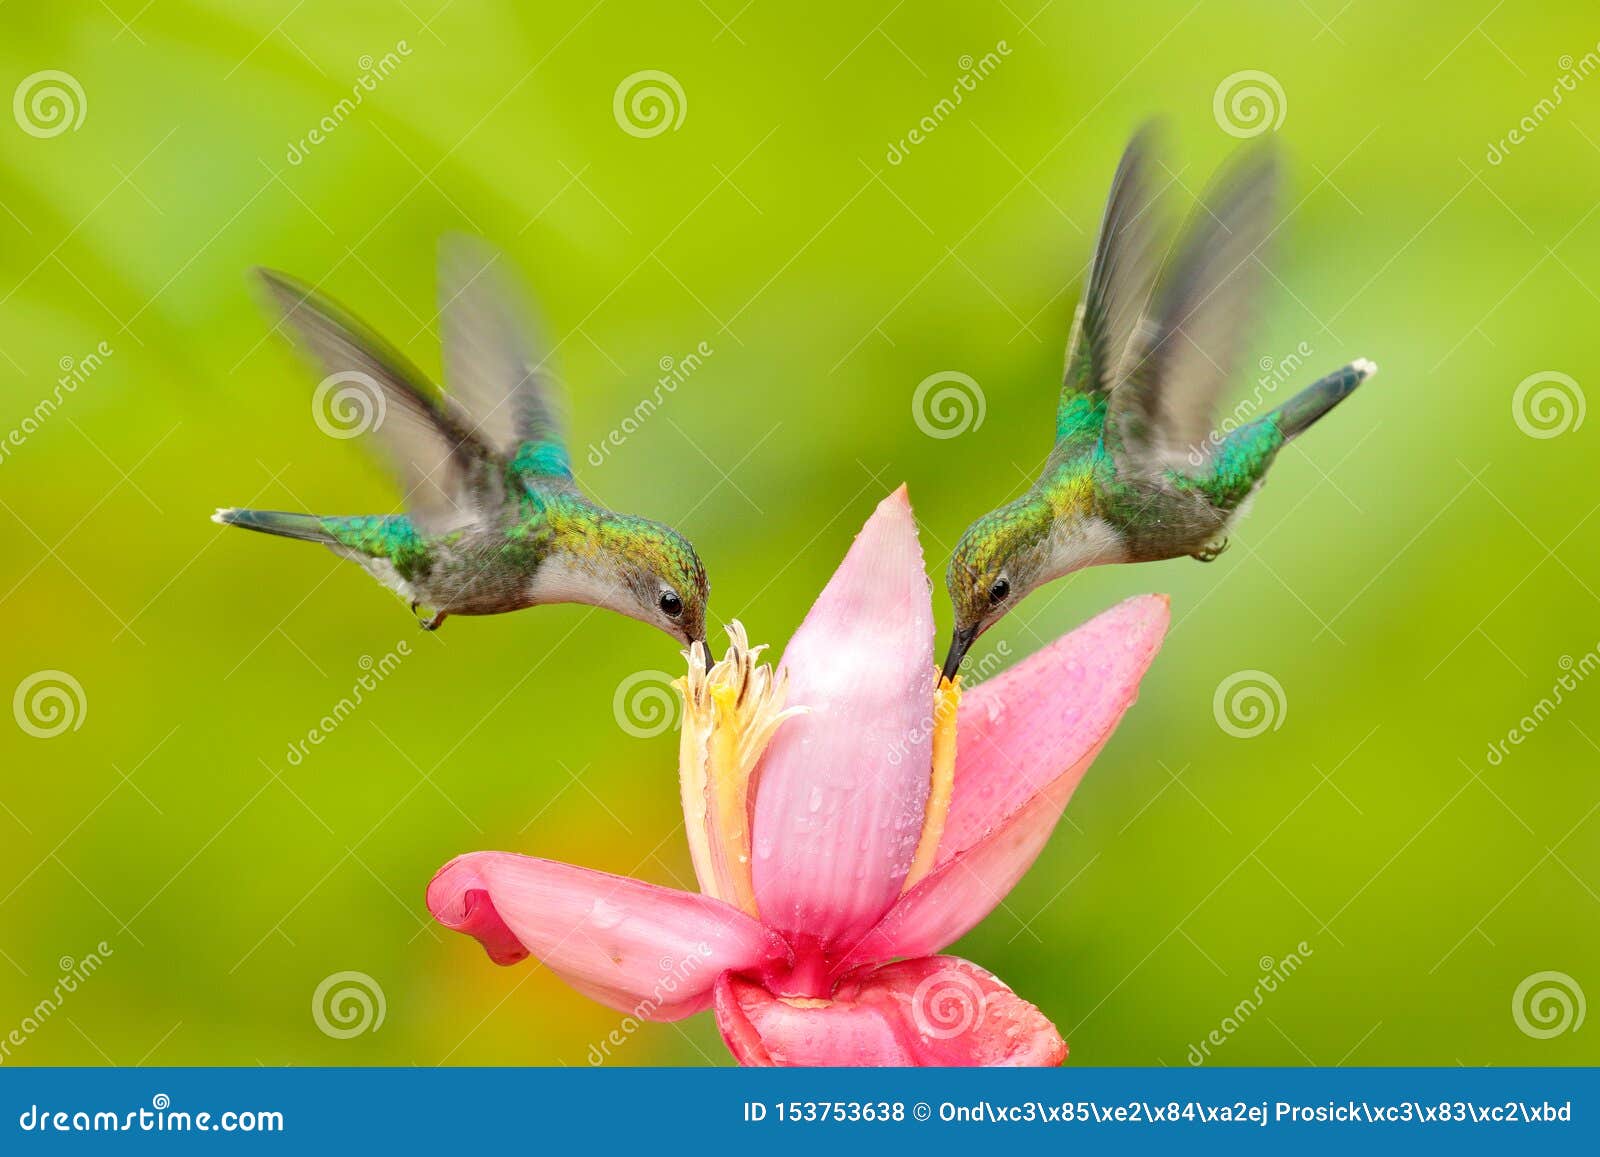 two hummingbird from colombia. andean emerald, amazilia franciae, with pink red flower, clear green background, colombia. wildlife